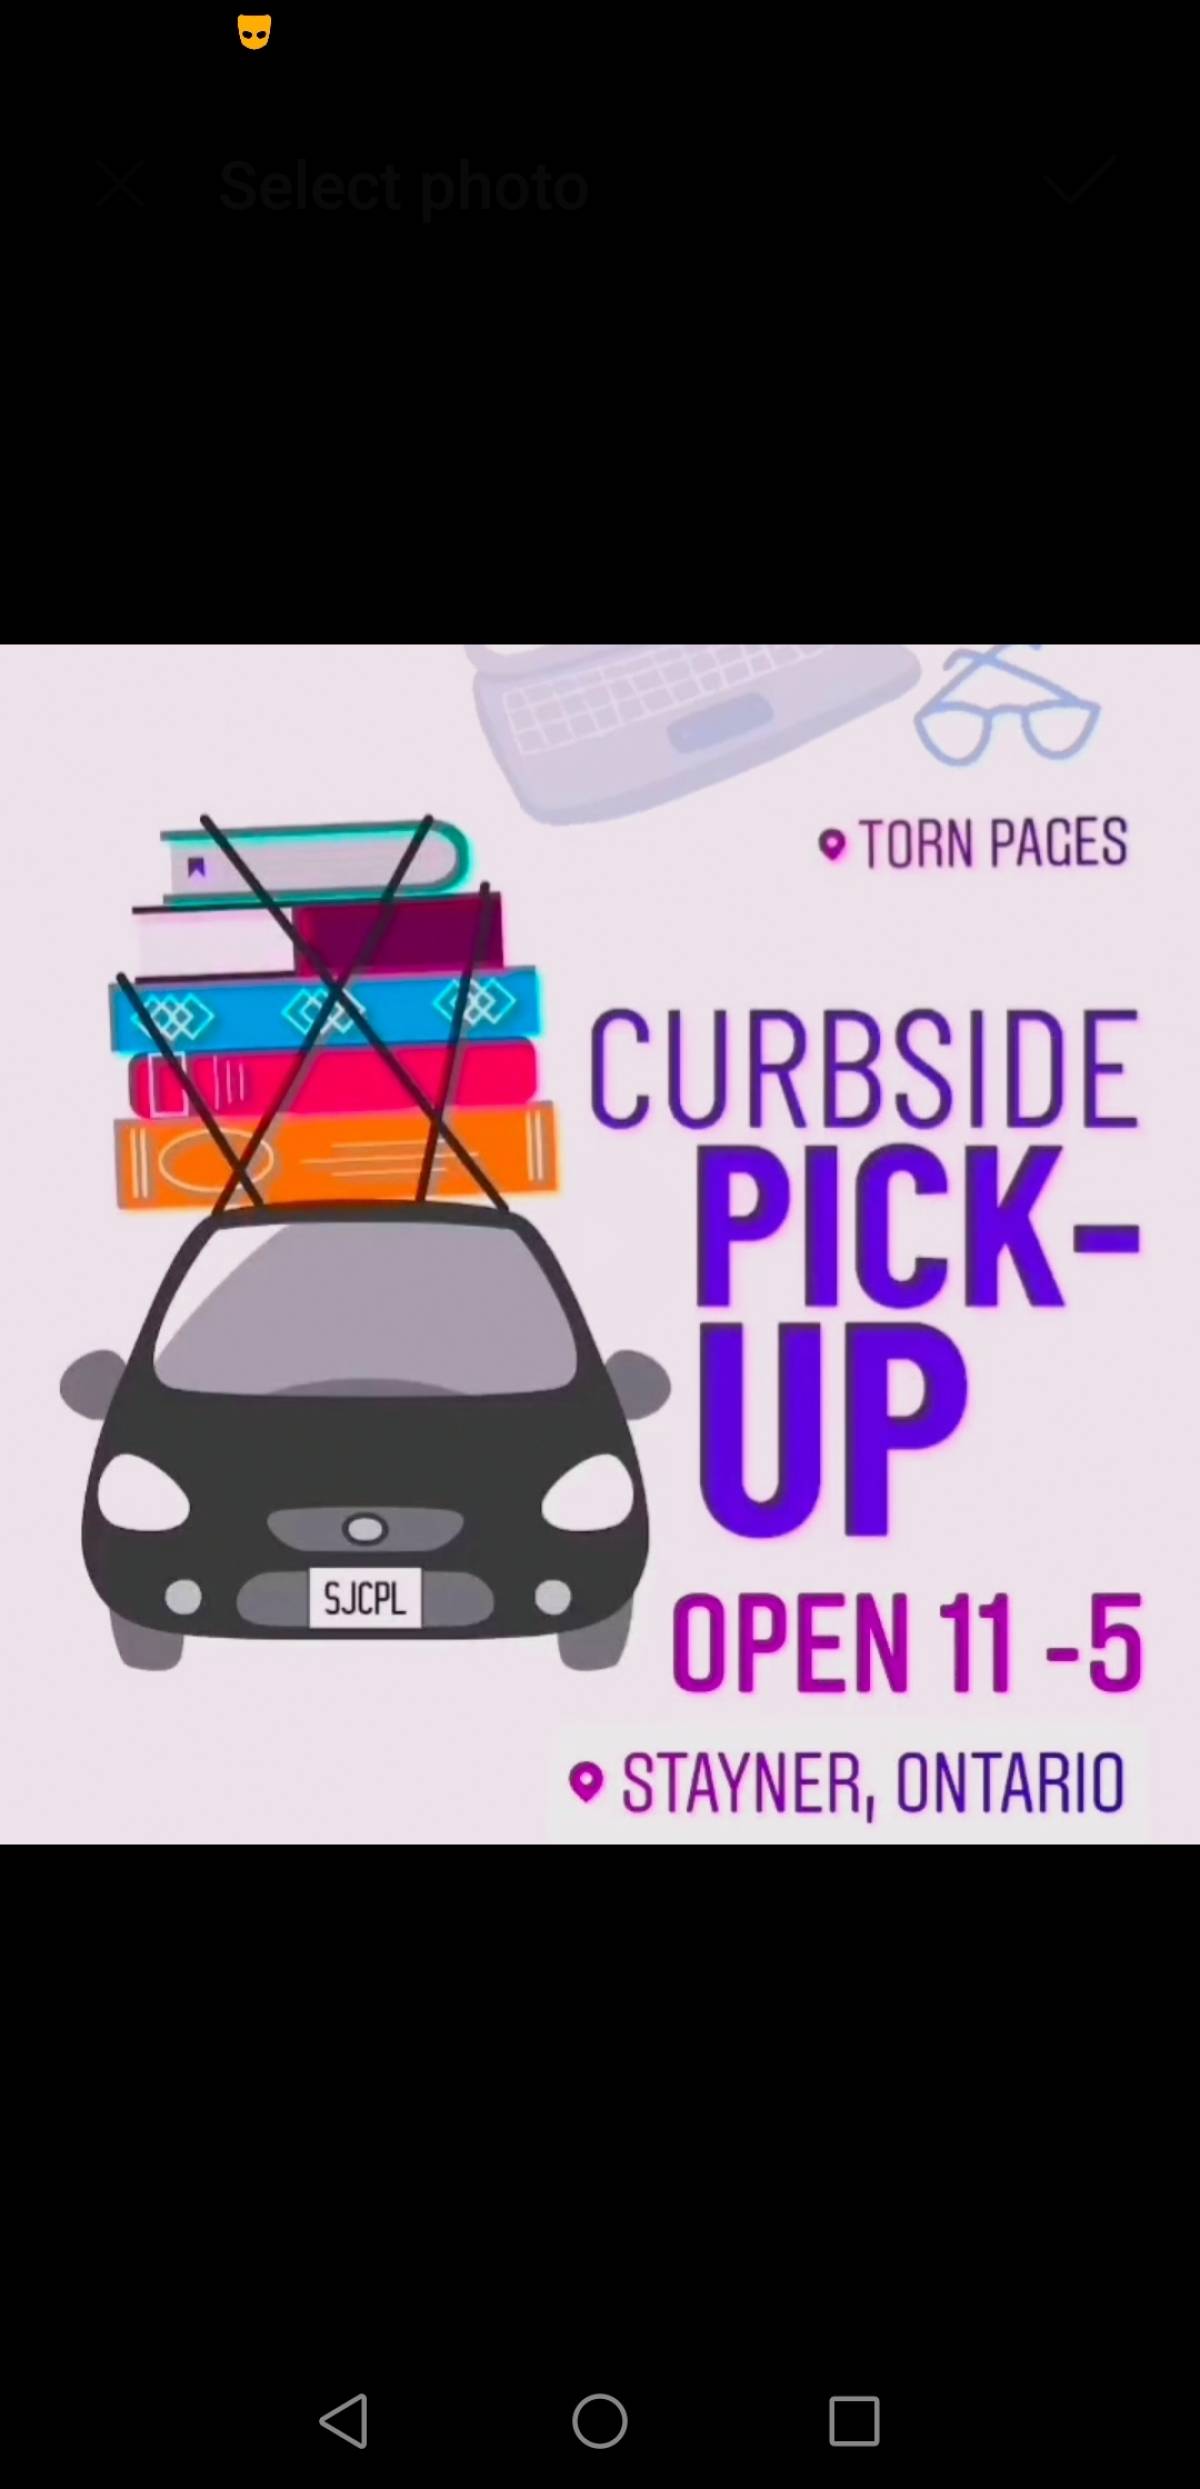 NEW HOURS FOR CURBSIDE PICK-UP (No walk-ins )